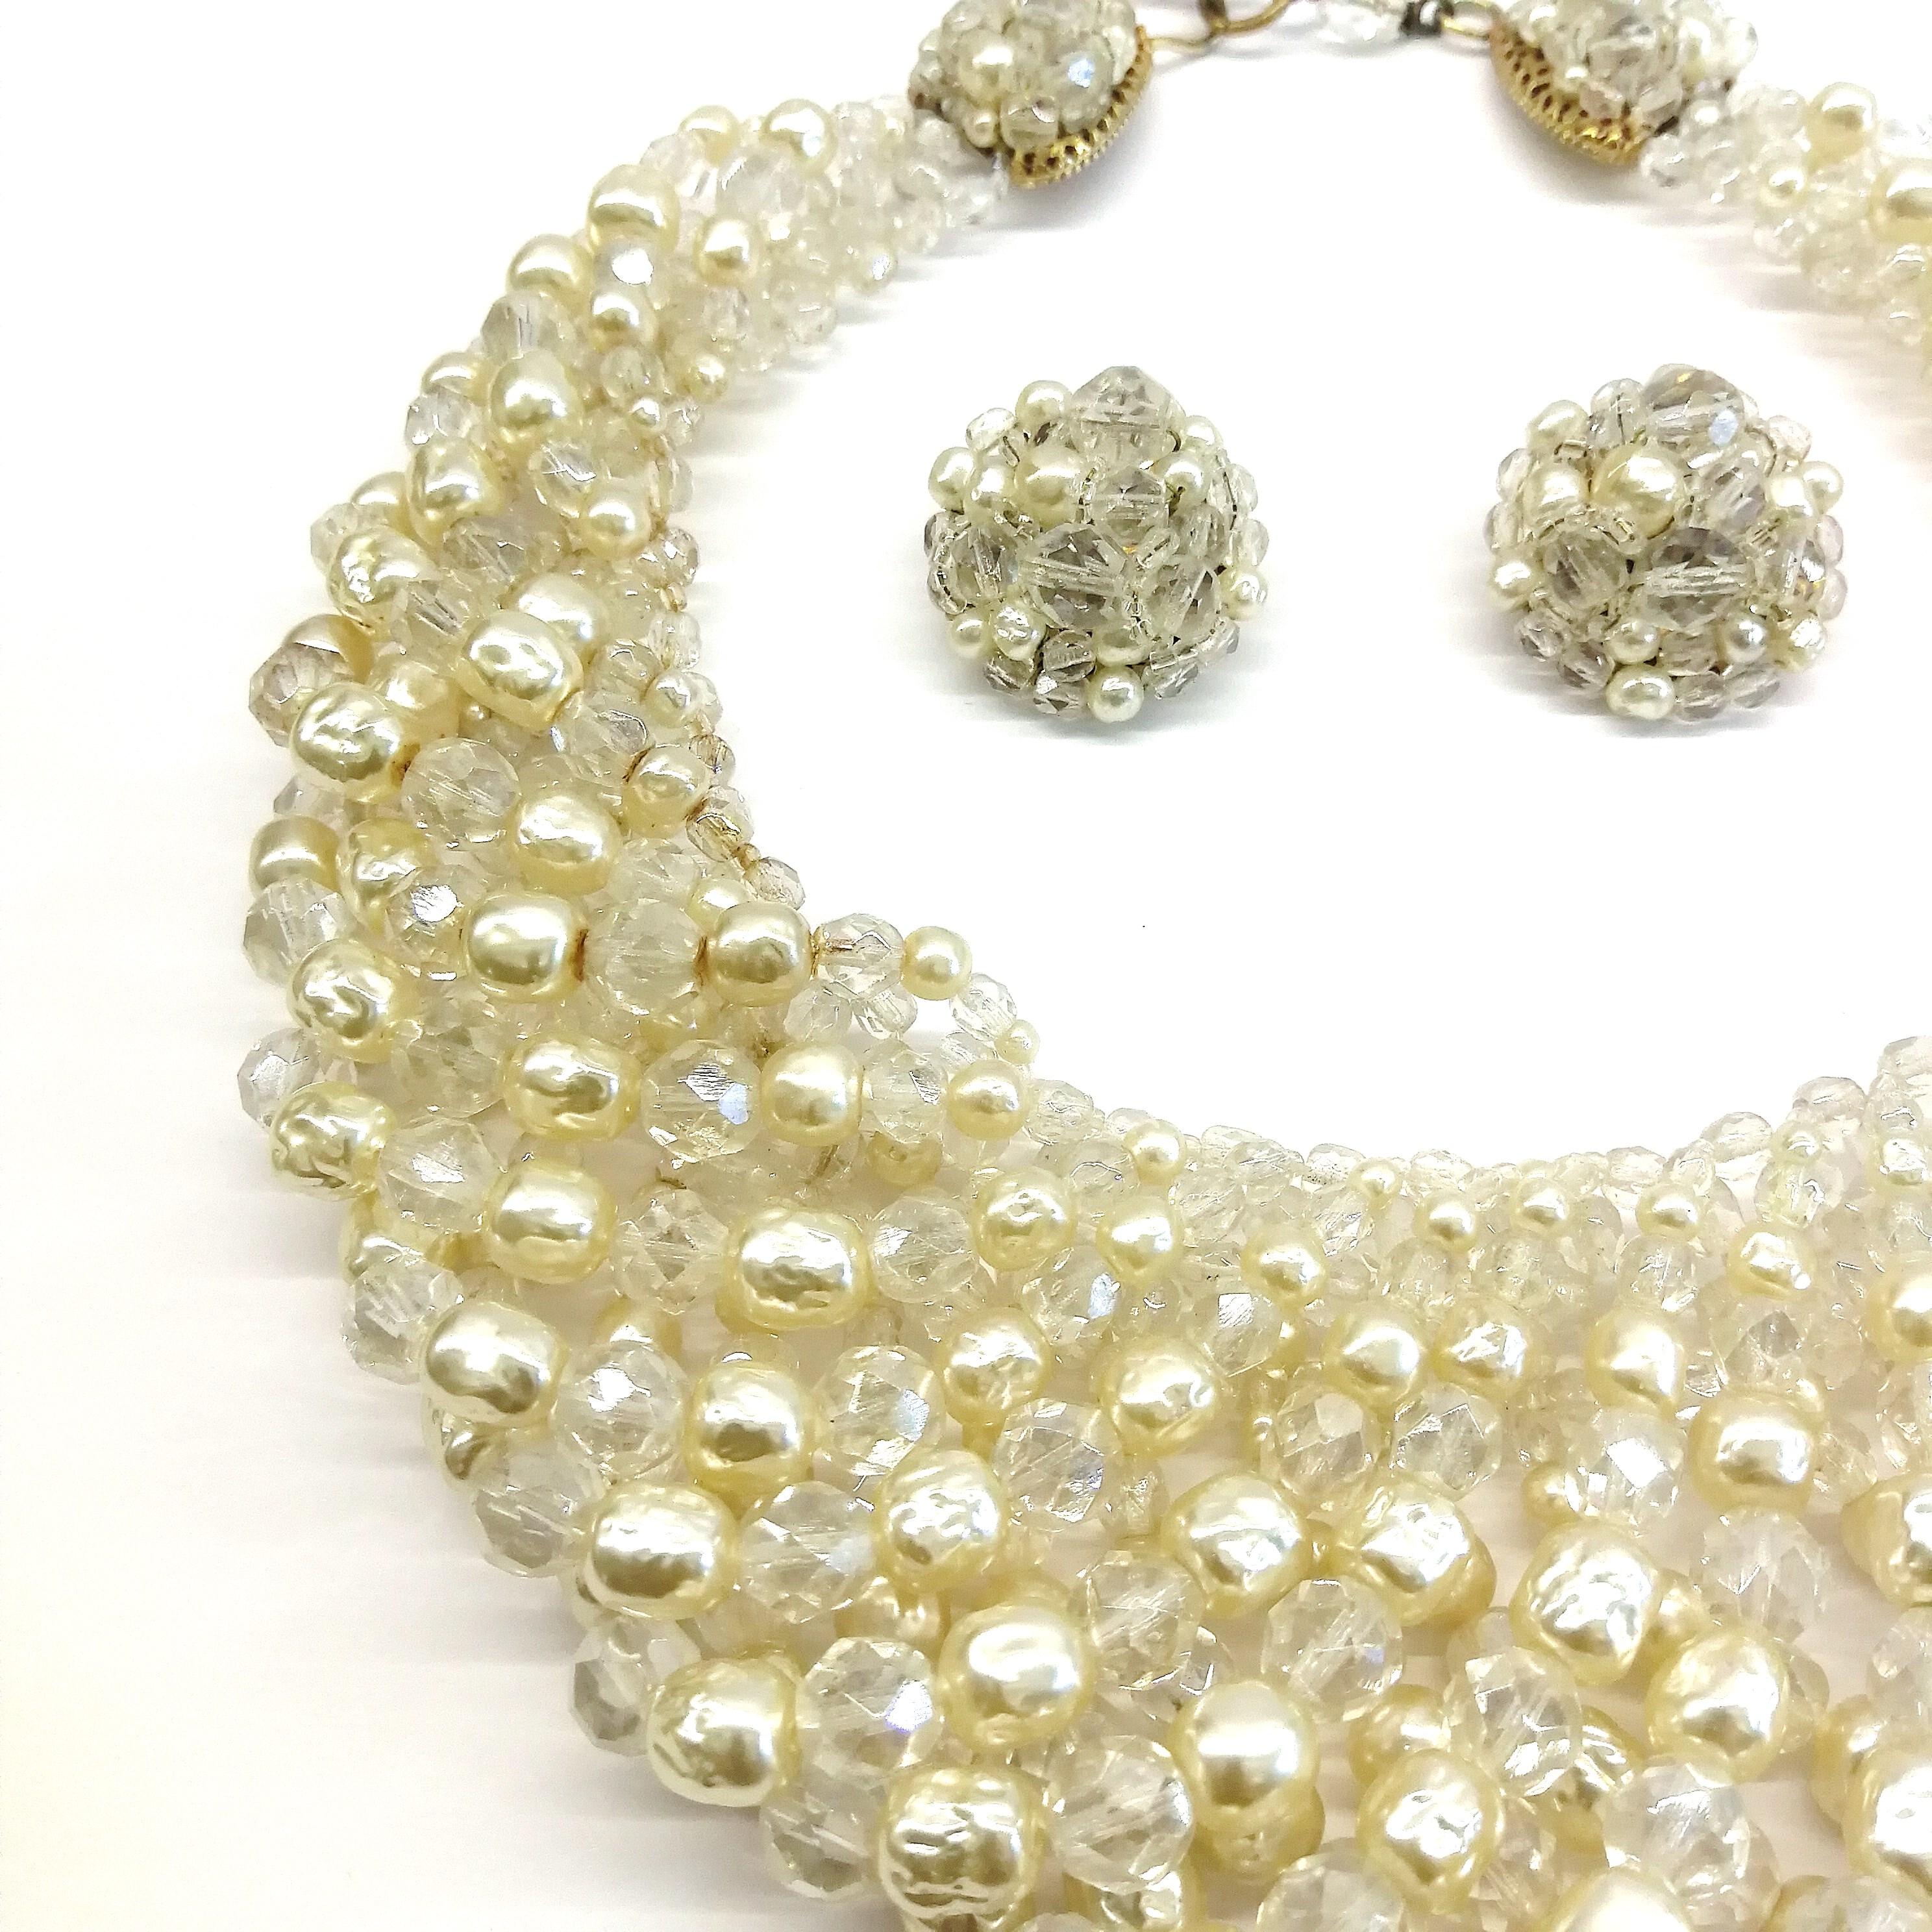 Women's Baroque pearl and half crystal bead necklace and earrings, Coppola e Toppo, 1969